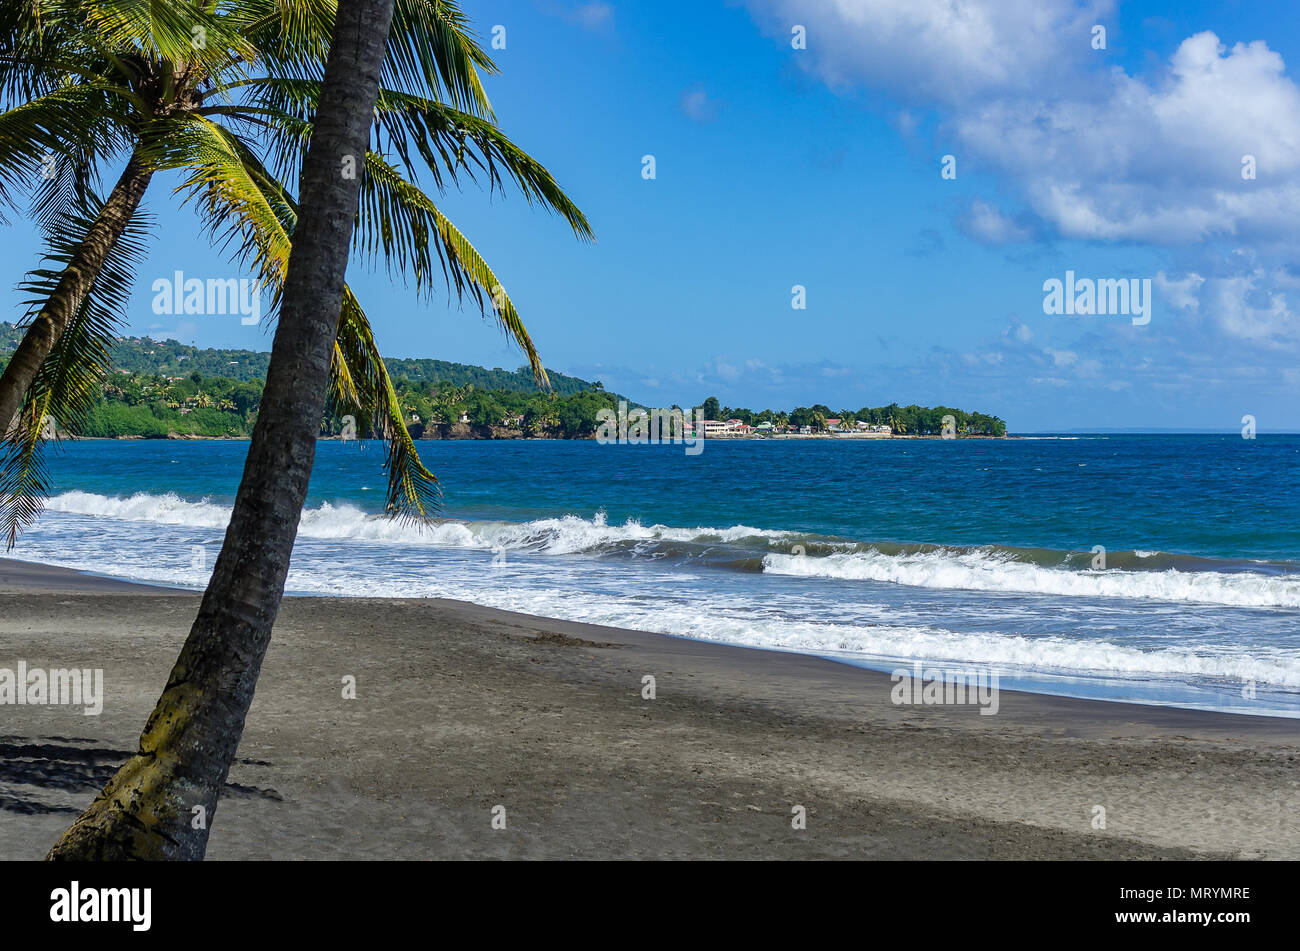 Black beach with palms in the foreground on Basse-Terre, Guadeloupe, French antilles Stock Photo